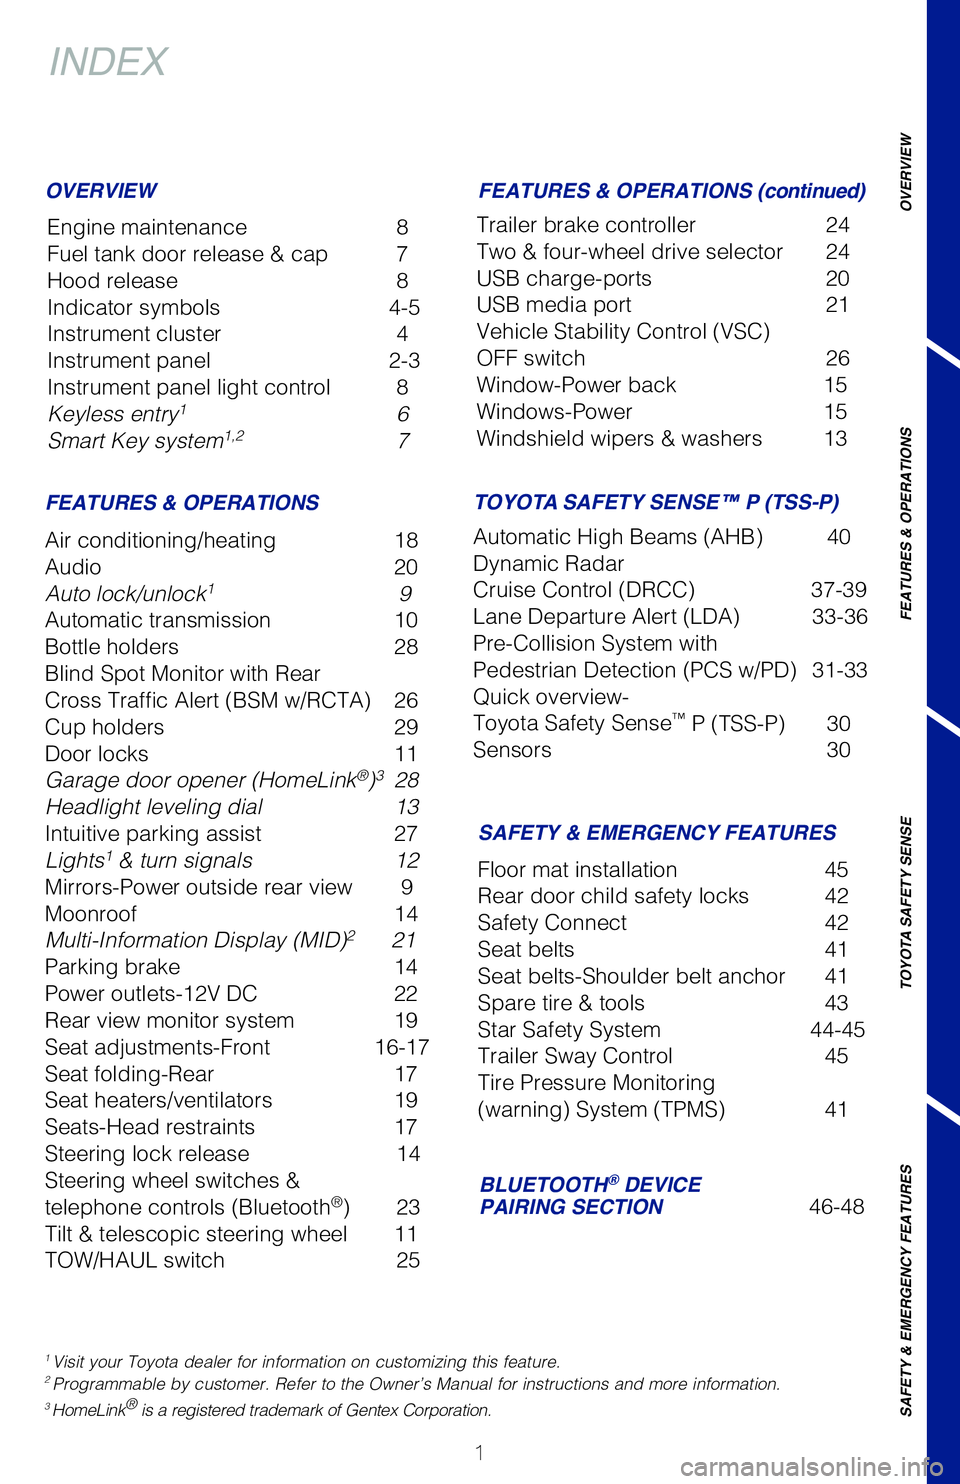 TOYOTA TUNDRA 2020  Owners Manual (in English) 1
OVERVIEW
FEATURES & OPERATIONS
TOYOTA SAFETY SENSE
SAFETY & EMERGENCY FEATURES
INDEX
Engine maintenance 8
Fuel tank door release & cap 7
Hood release 8
Indicator symbols 4-5
Instrument cluster 4
Ins